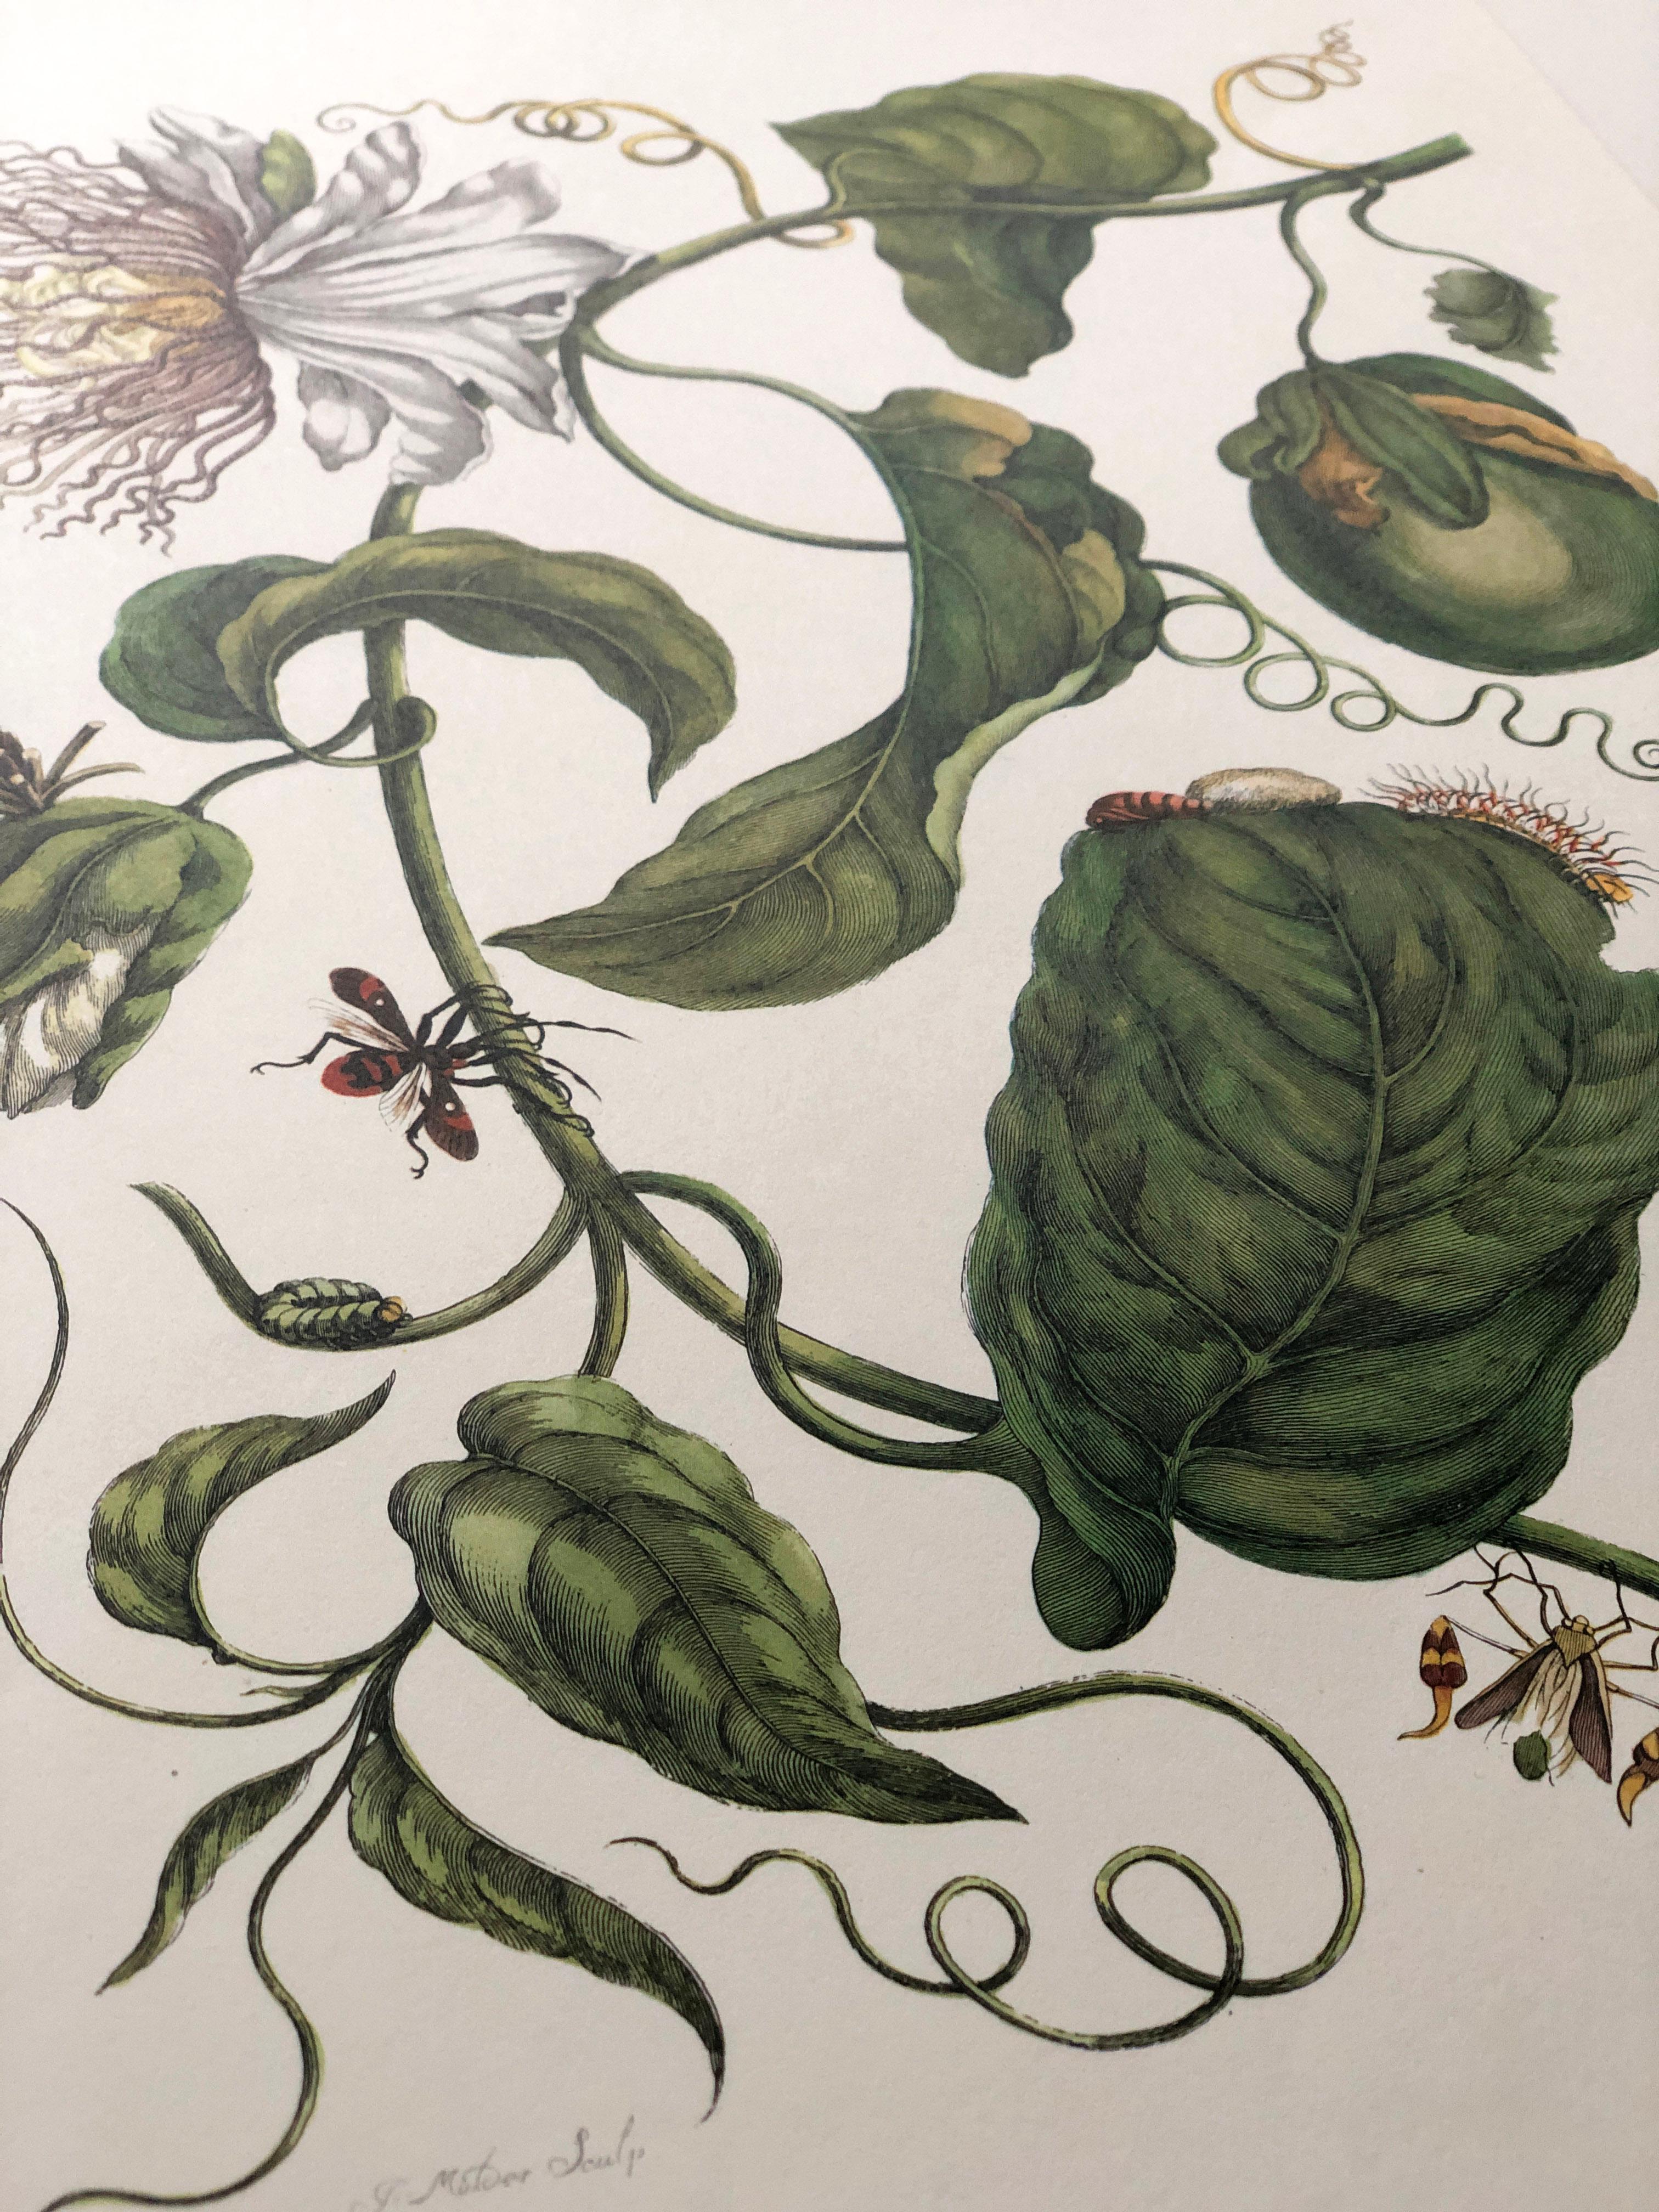 Paper Maria Sibylla Merian - J. Mulder - Passionflower and insects Nr. 21 For Sale